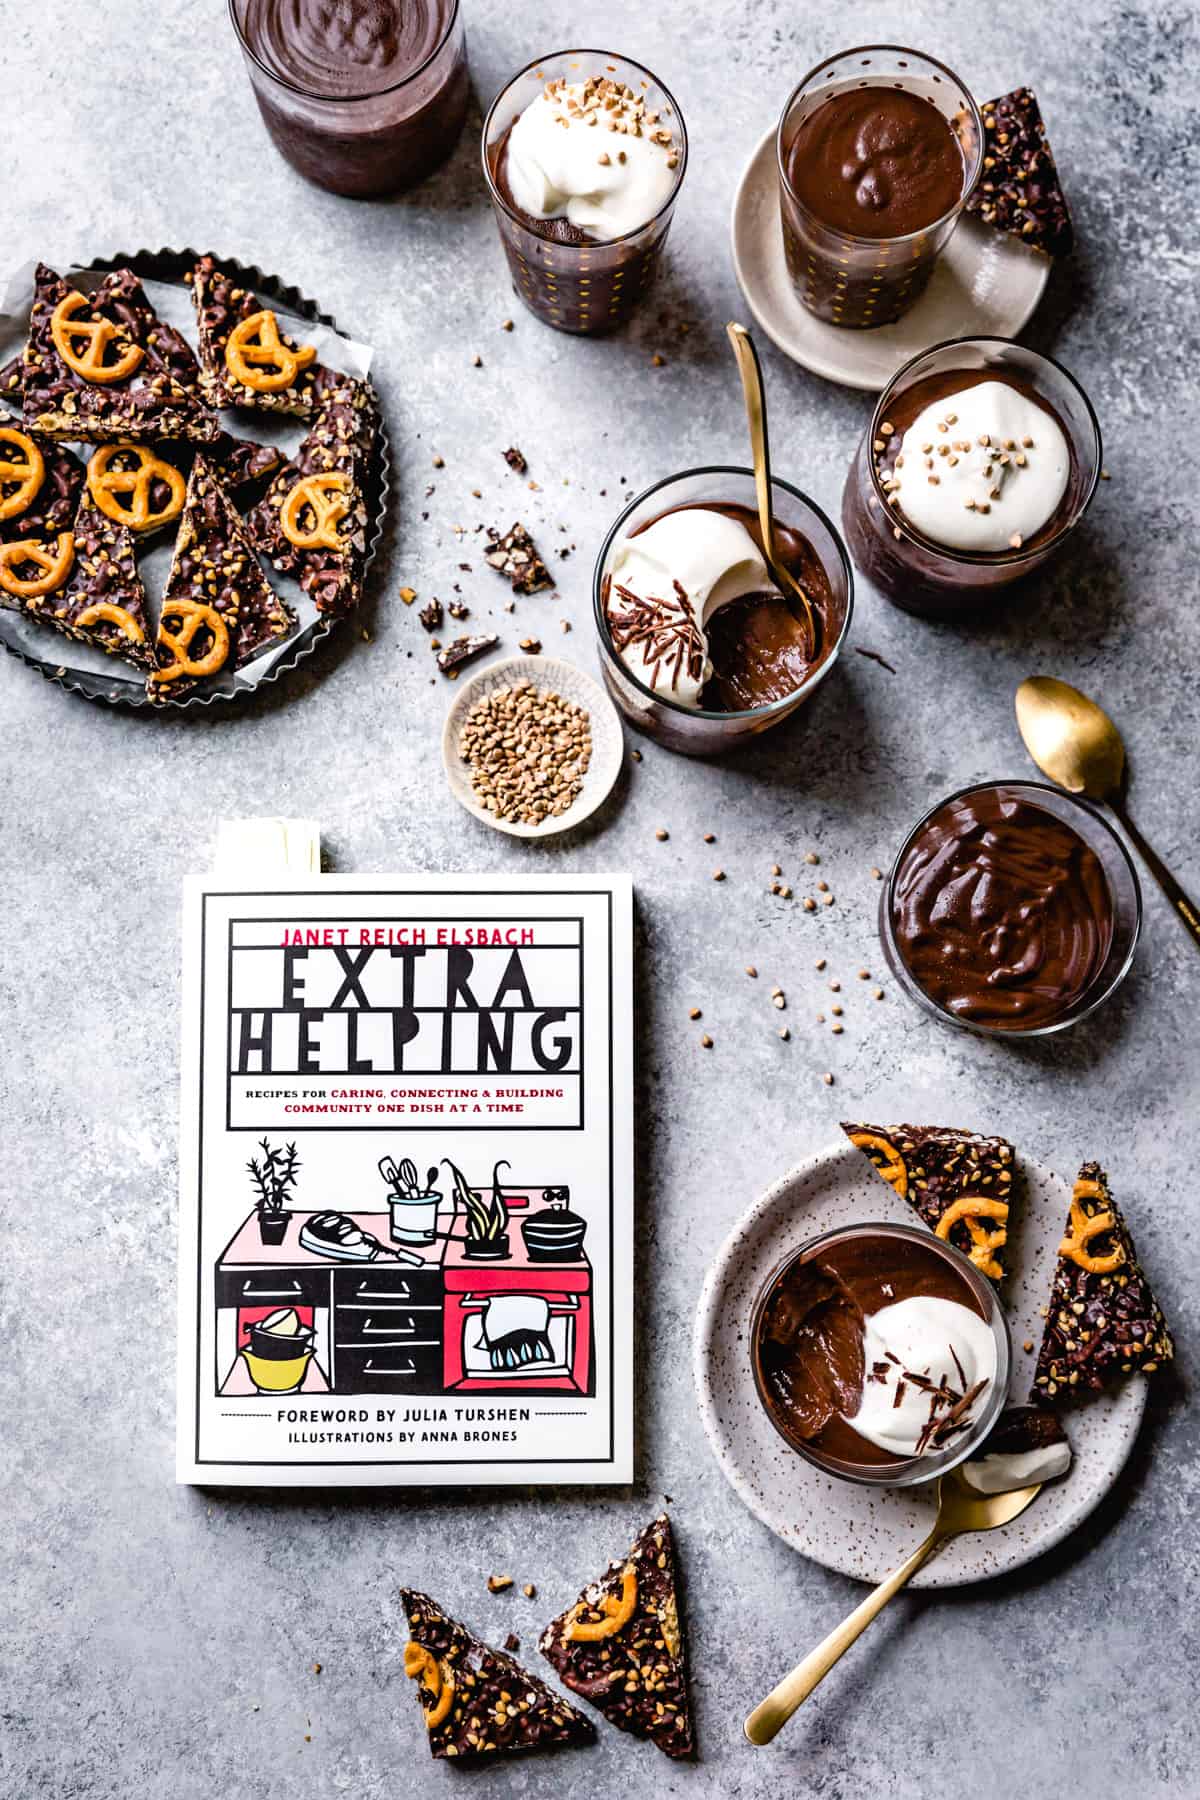 Chocolate Pudding and cookbook on table 